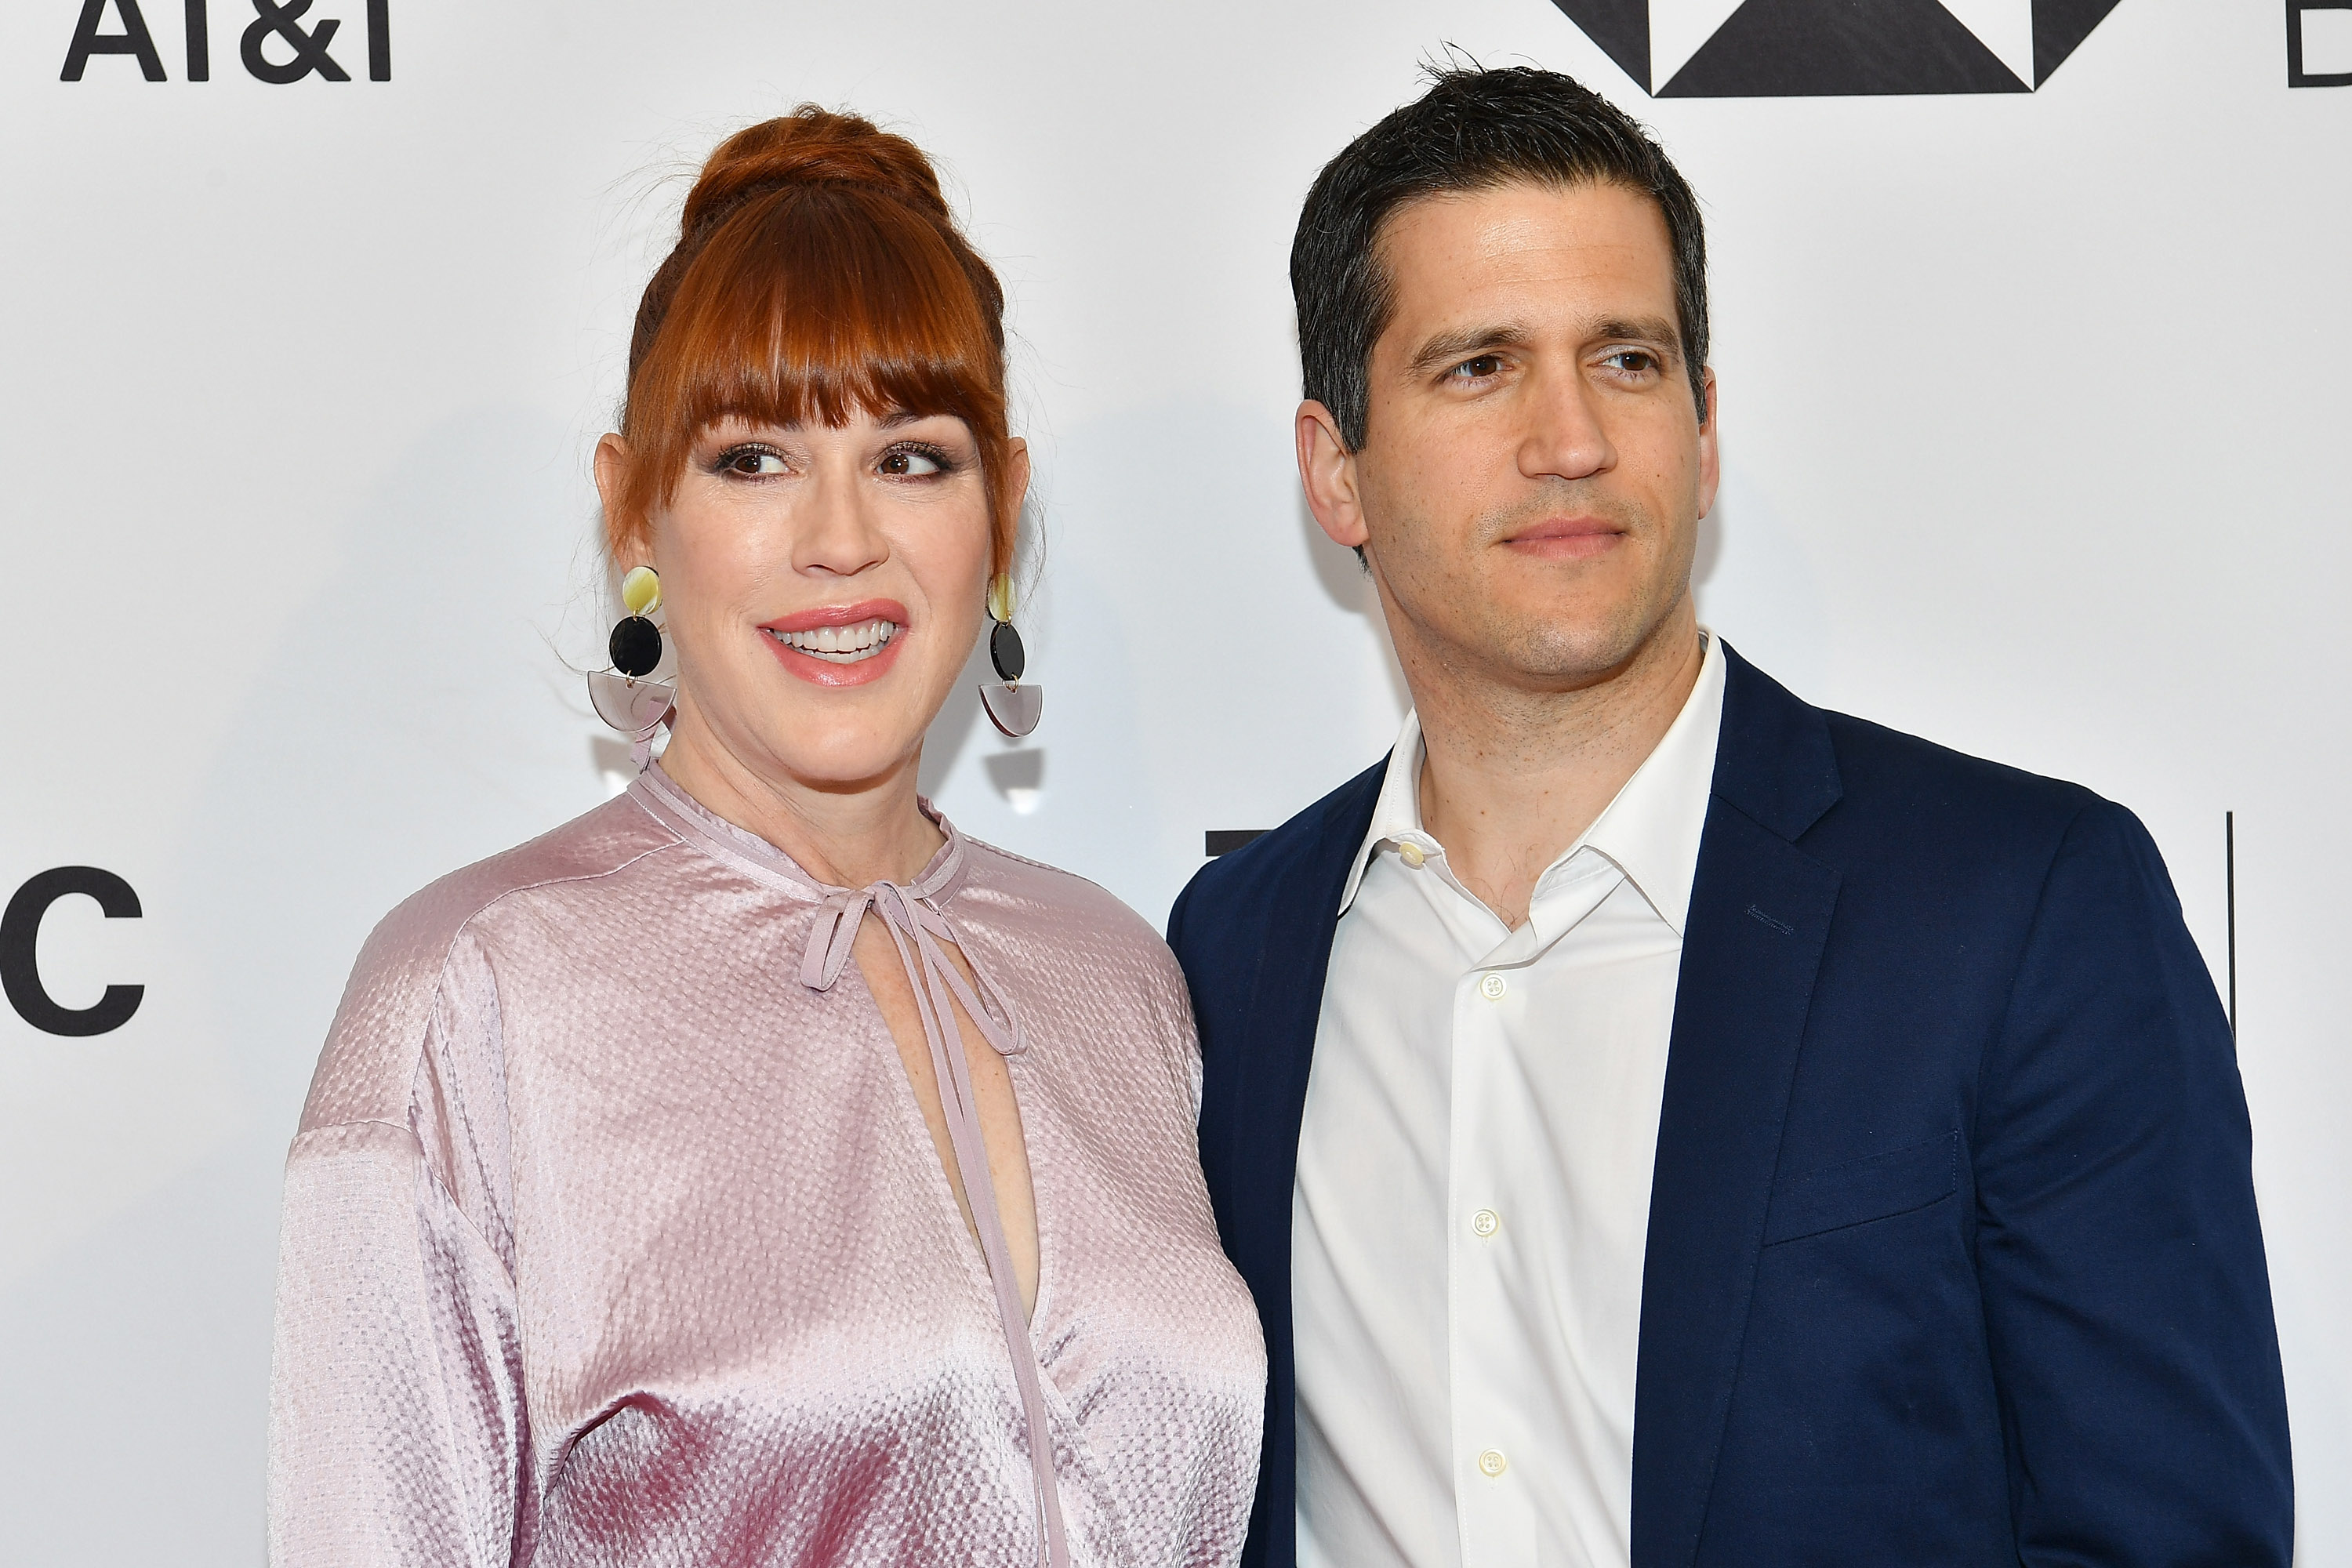 Molly Ringwald and Panio Gianopoulos are pictured at the screening of "All These Small Moments" during the 2018 Tribeca Film Festival at SVA Theatre on April 24, 2018, in New York City | Source: Getty Images